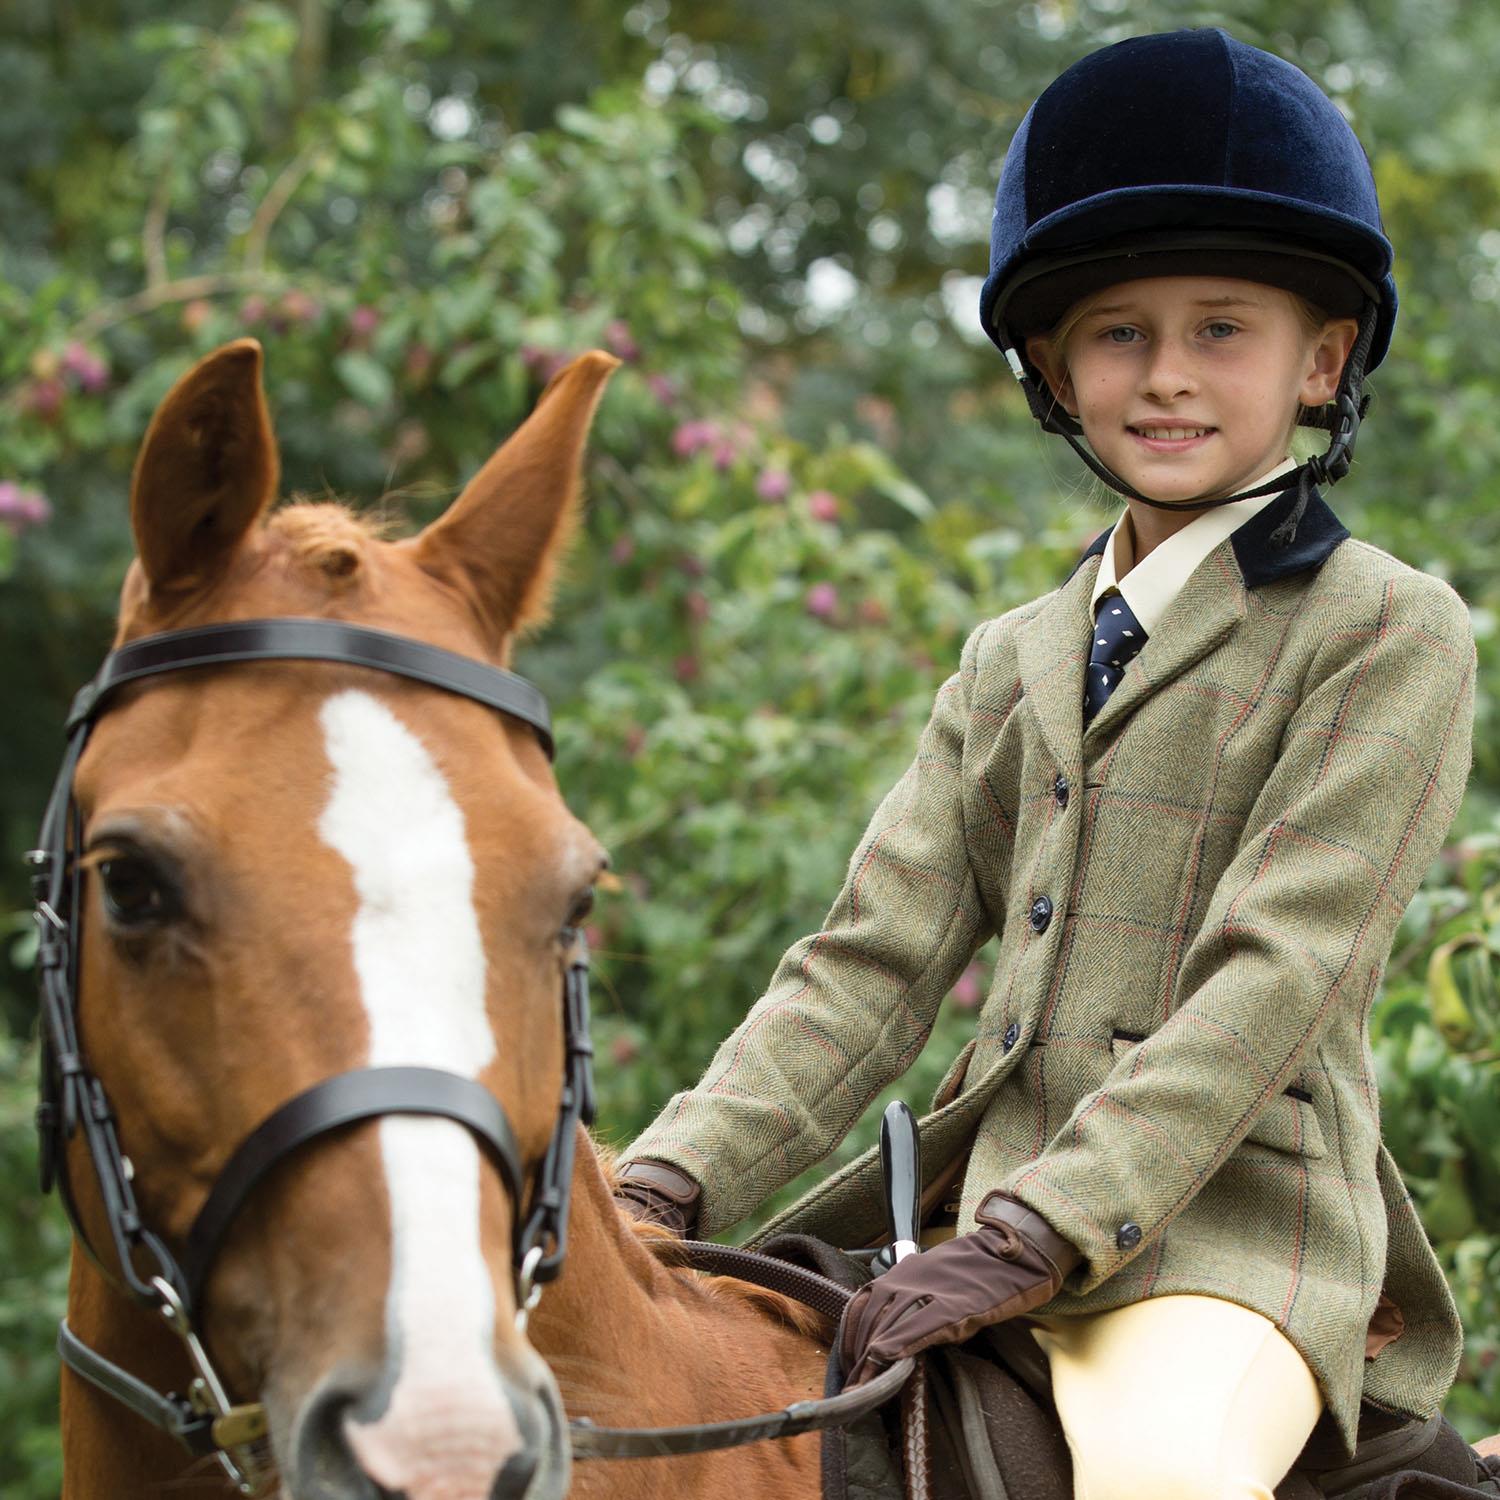 Equetech Childs Launton Deluxe Tweed Riding Jacket - Just Horse Riders